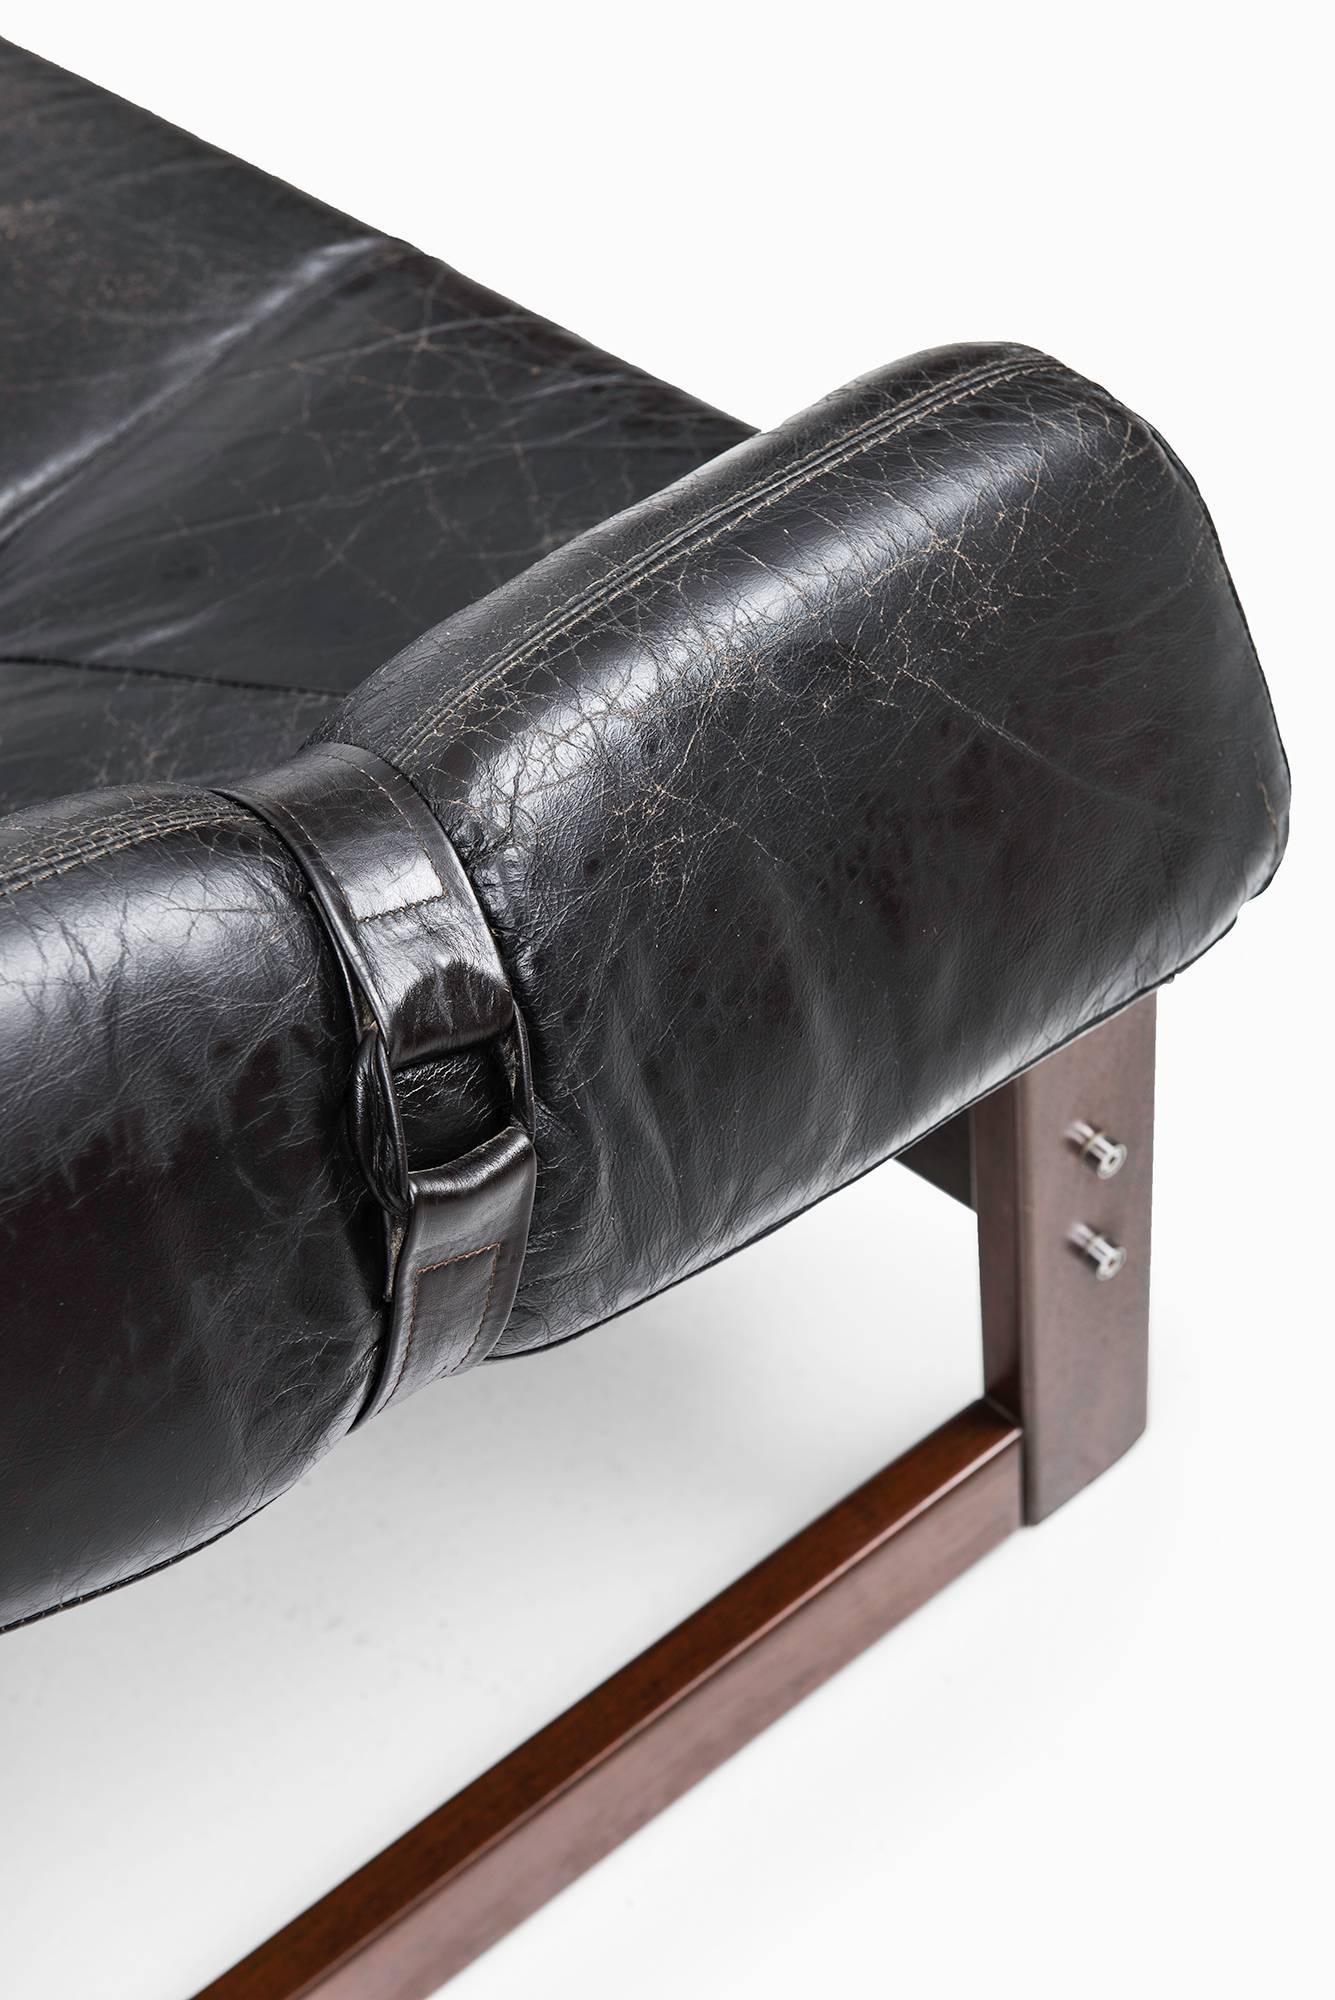 Mid-Century Modern Percival Lafer Three-Seat Sofa in Black Leather by Lafer MP in Brazil